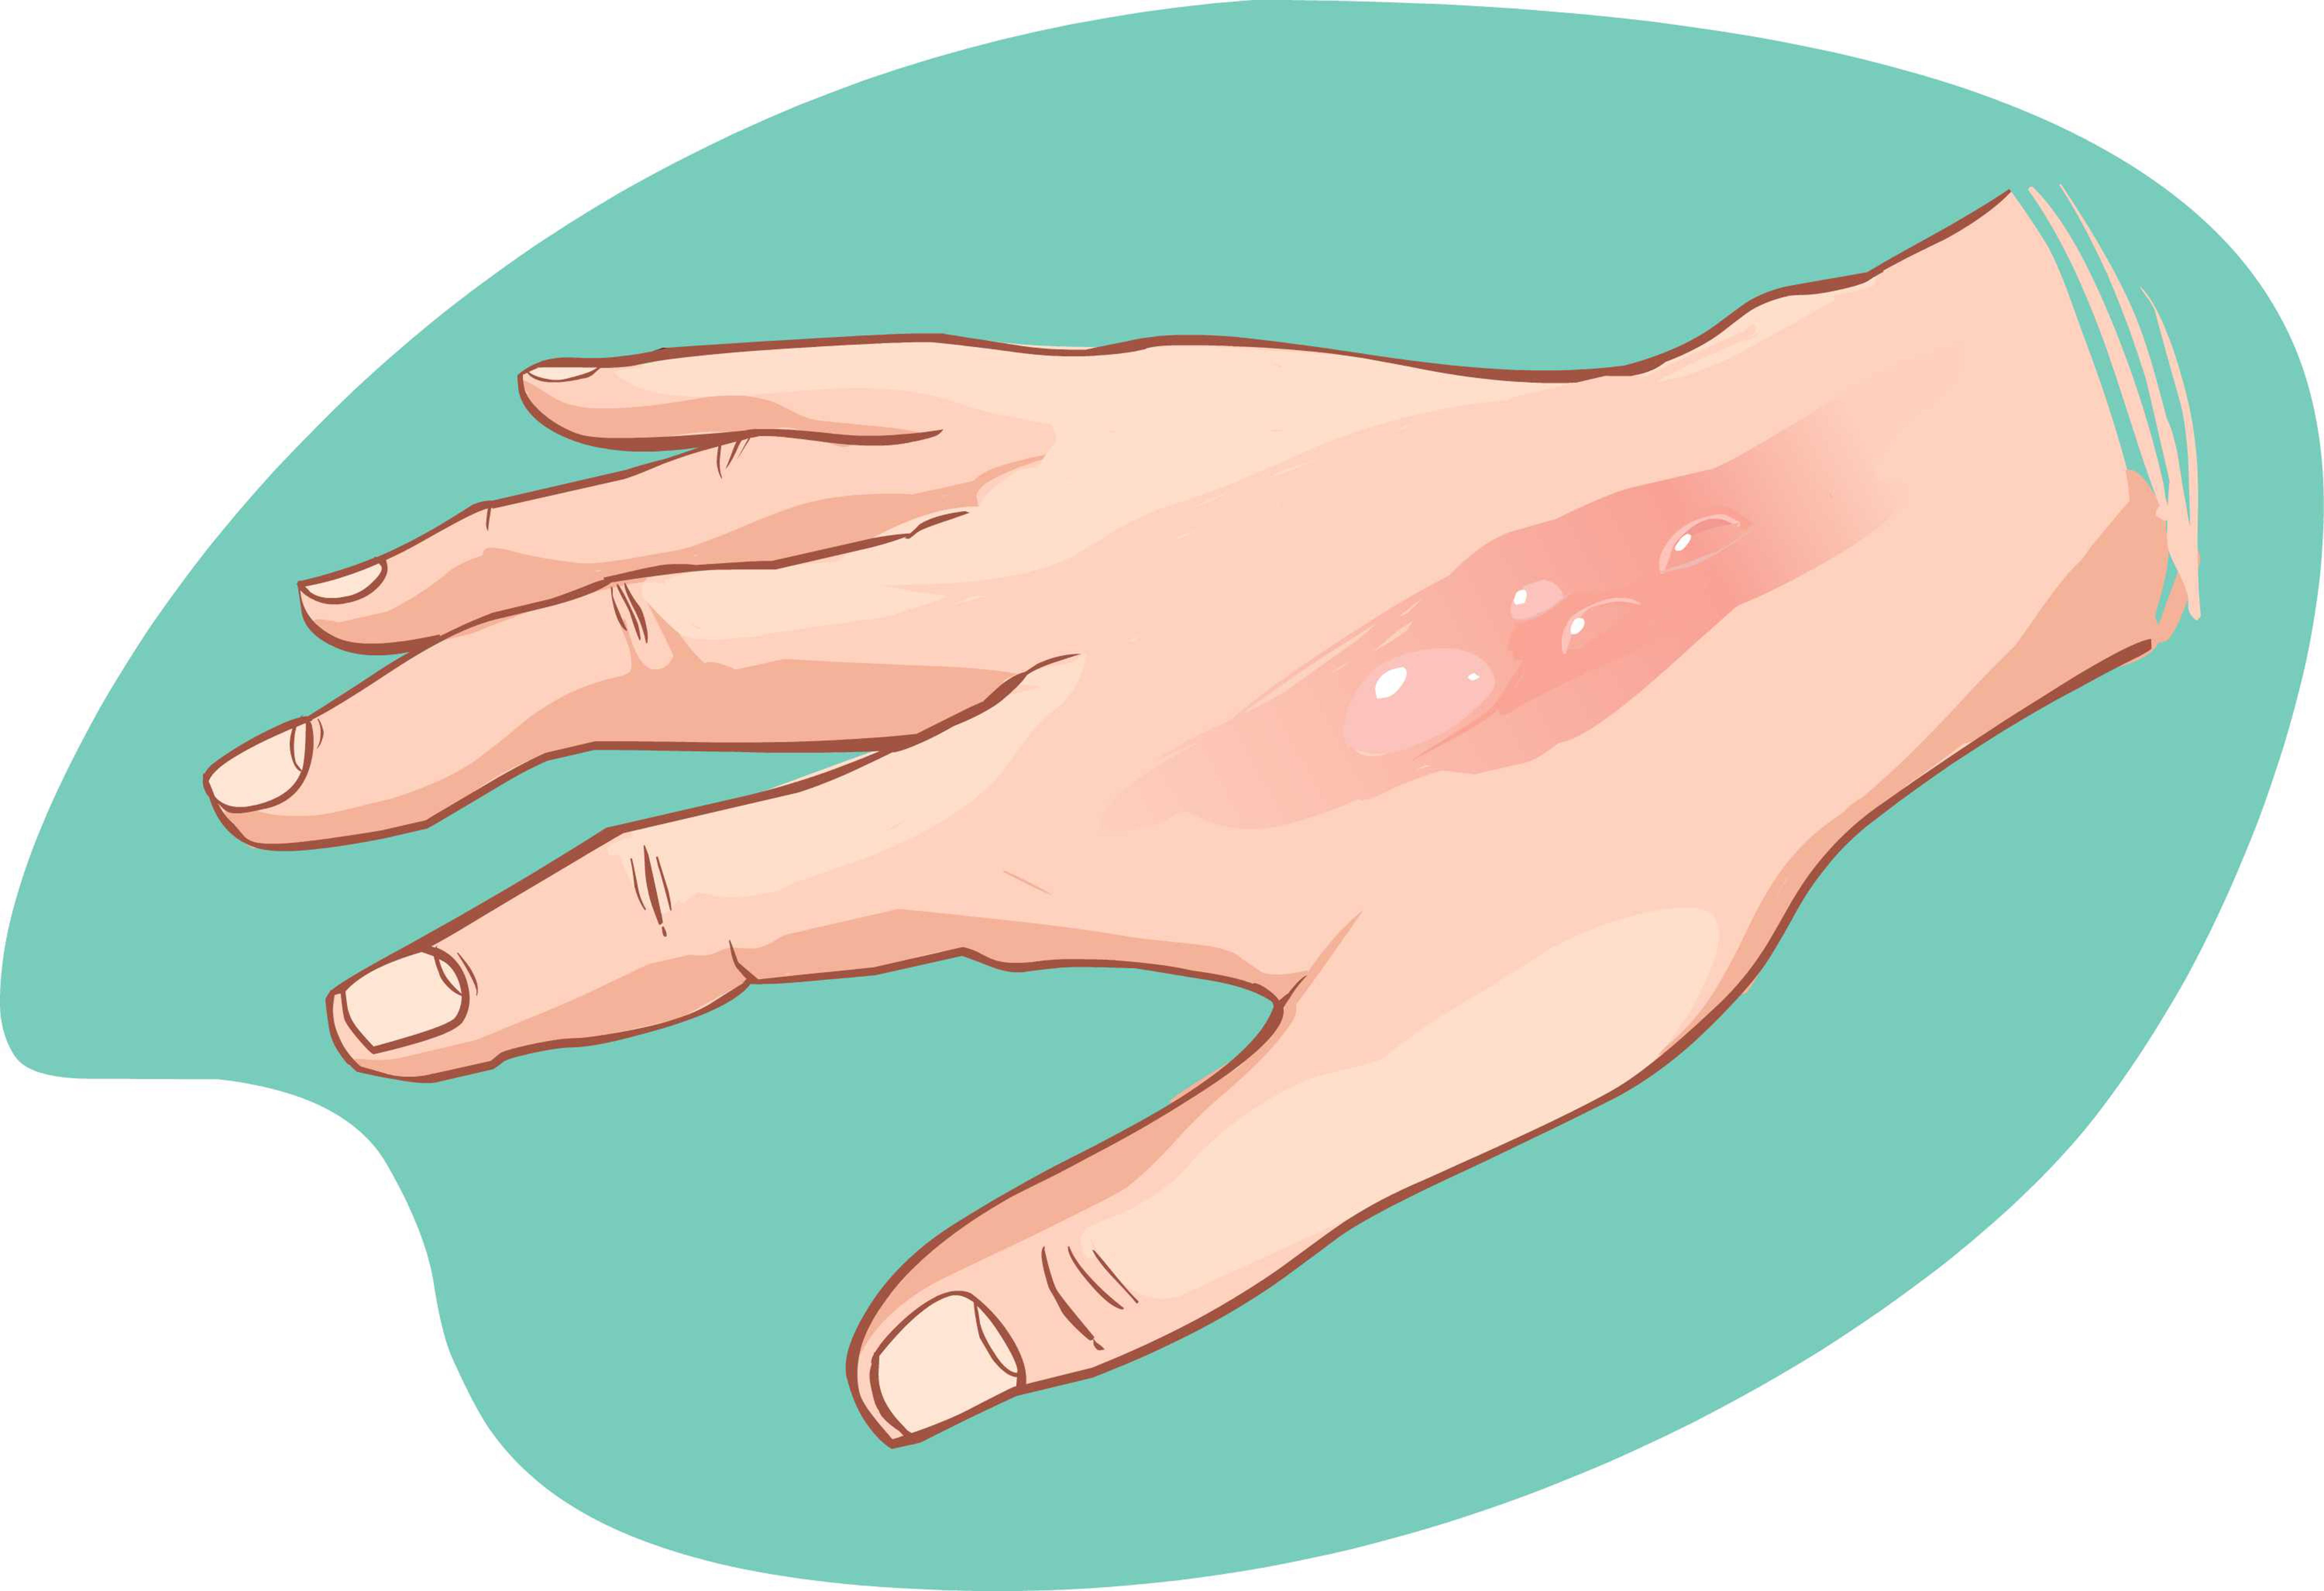 How to Treat Burn Wounds